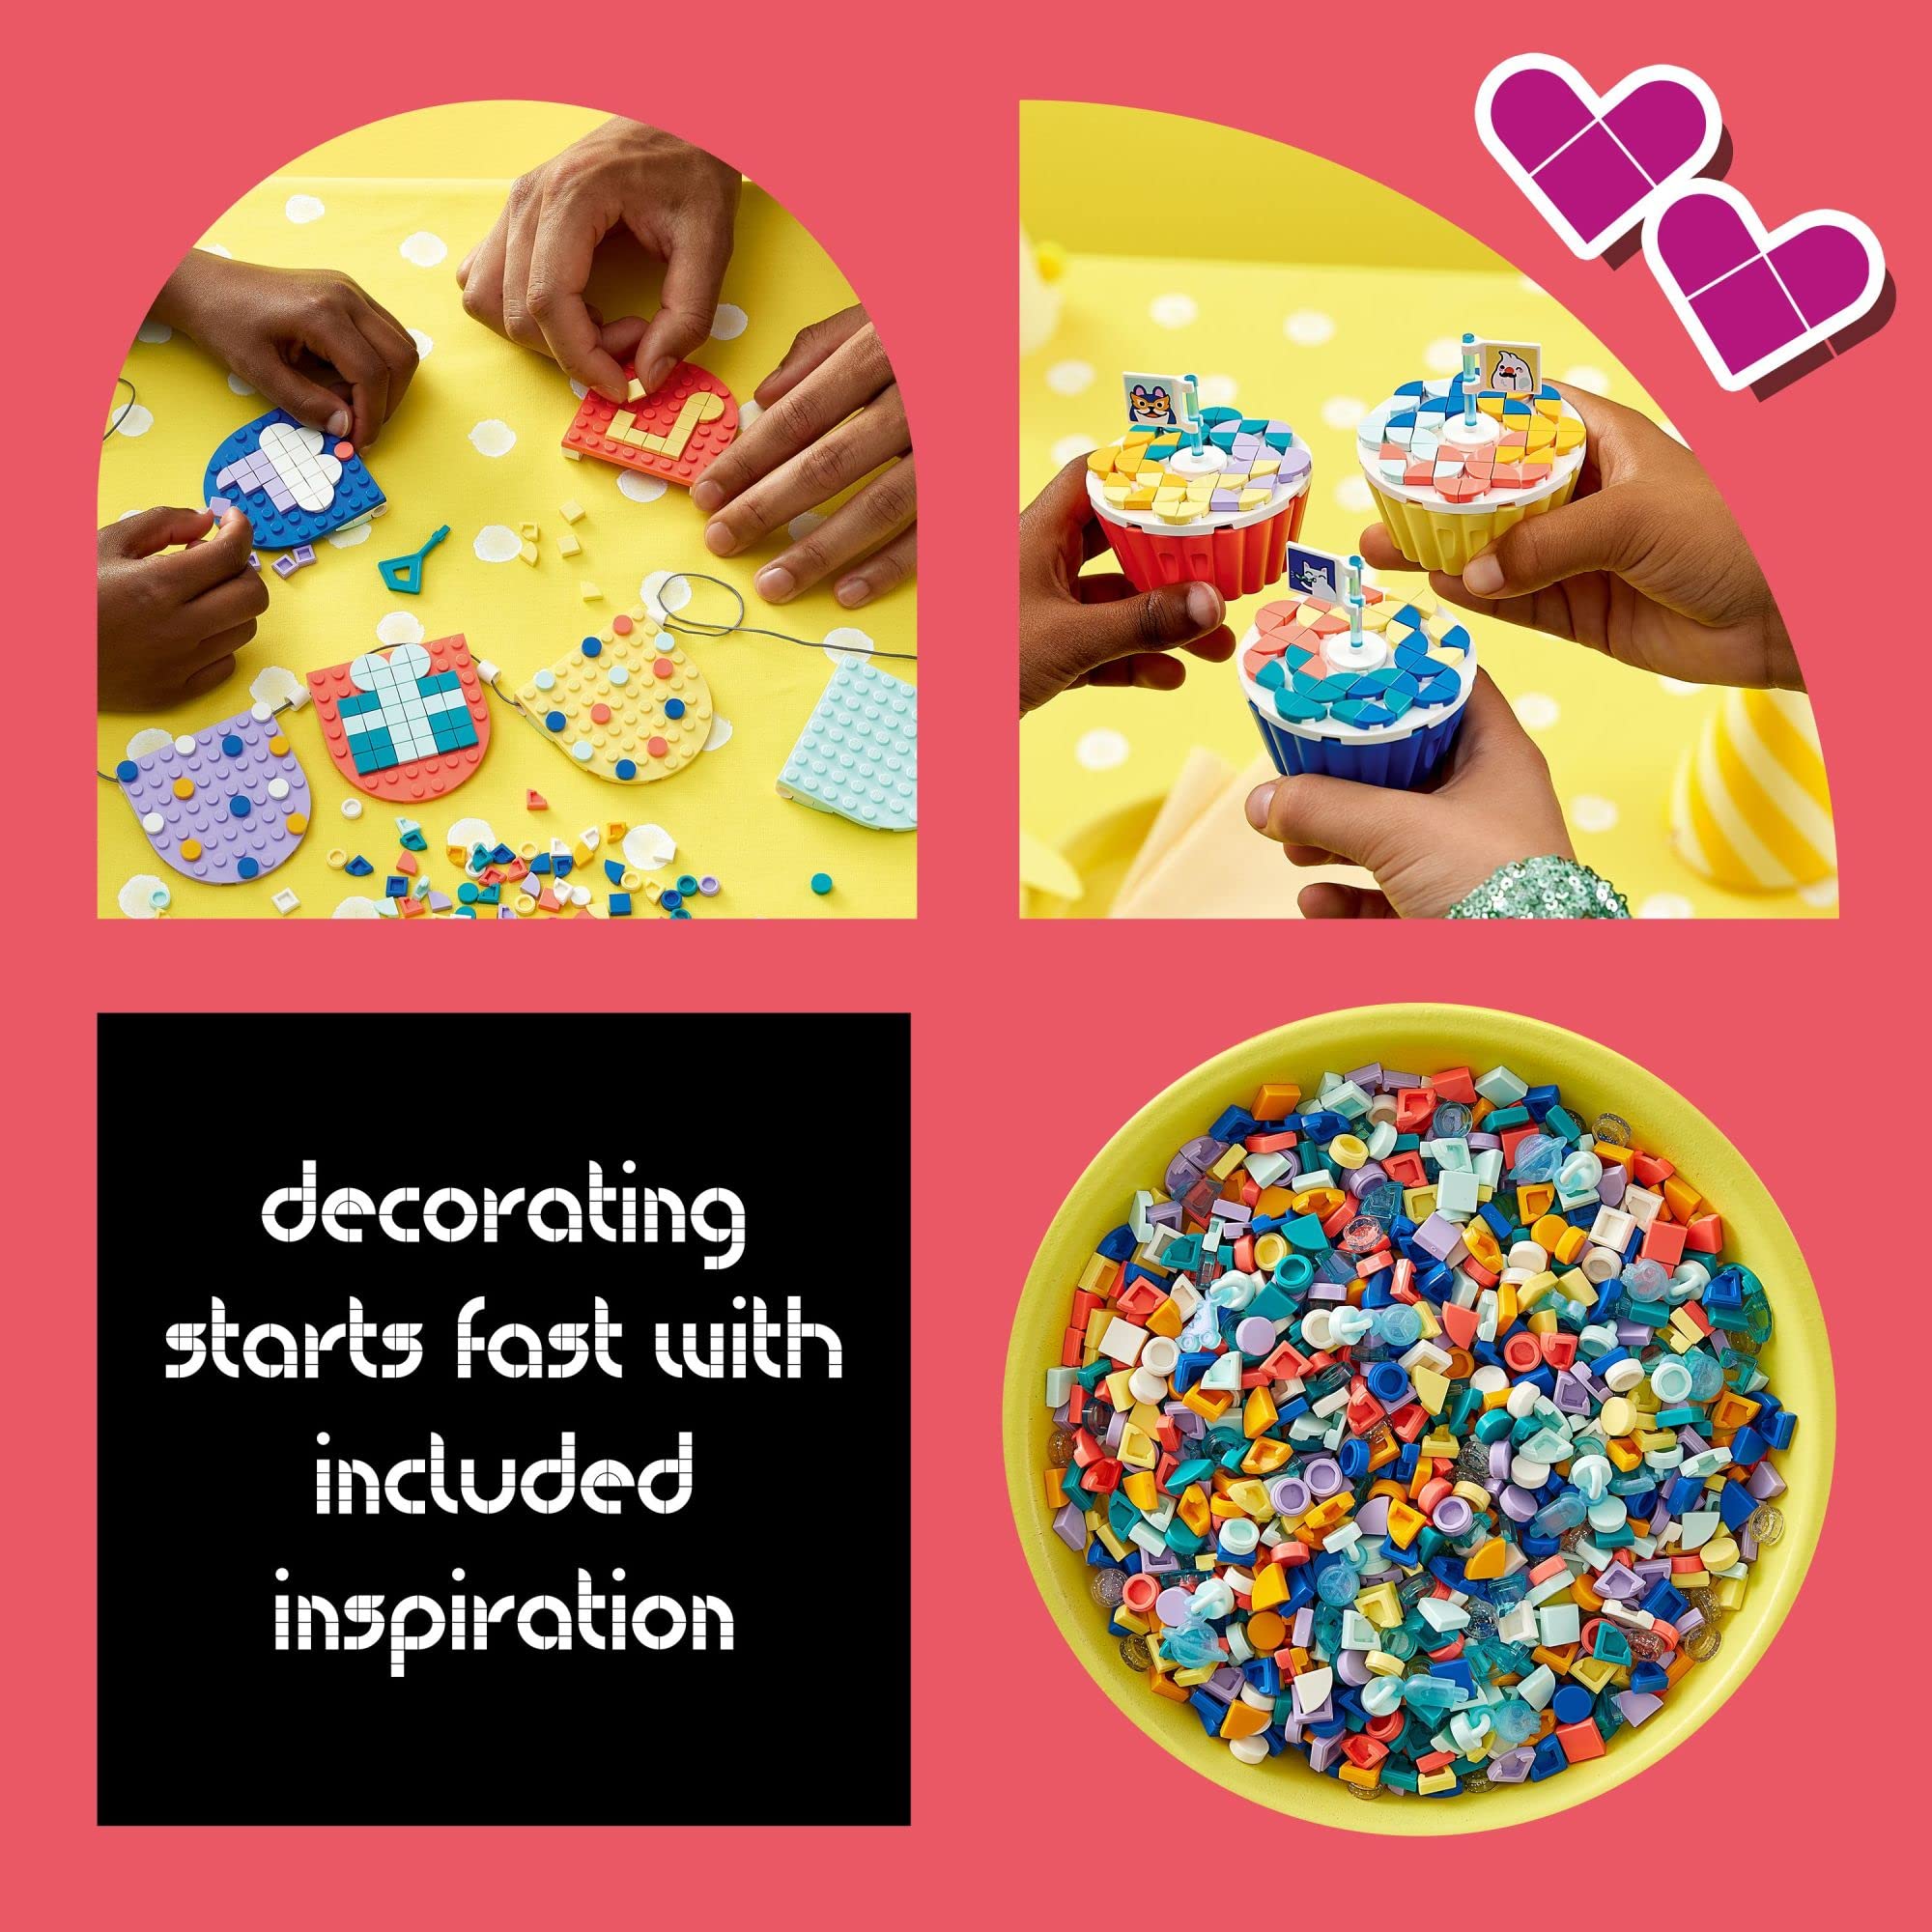 LEGO DOTS Ultimate Party Kit 41806, Arts & Crafts Birthday Party Games or DIY Party Bag Fillers with Toy Cupcakes, Best Friend Bracelets, and Bunting, Creative Gifts for Kids, Girls & Boys Ages 6-10